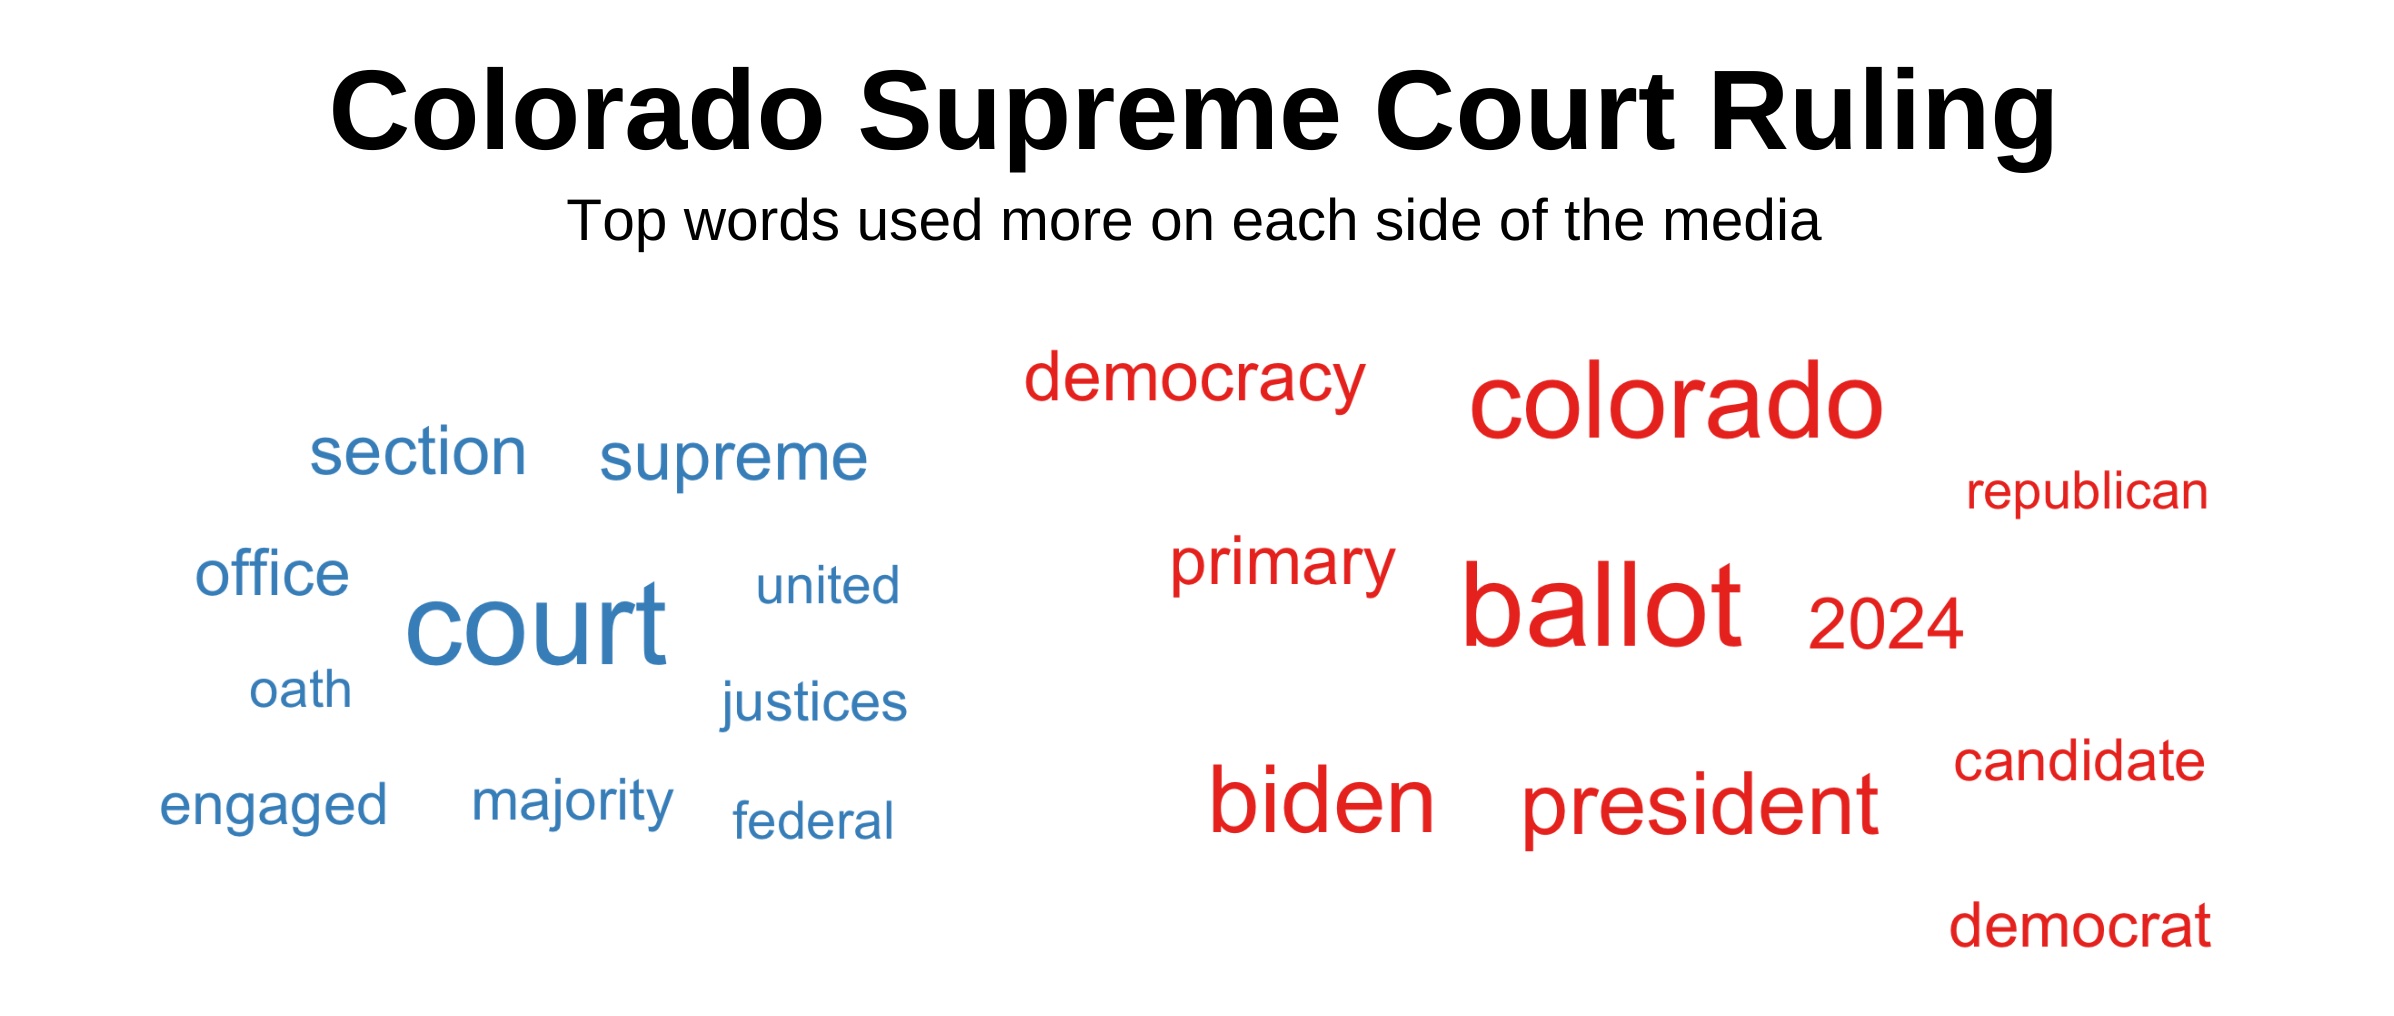 Top words about the Colorado Supreme Court Trump decision used more on each side of the media.